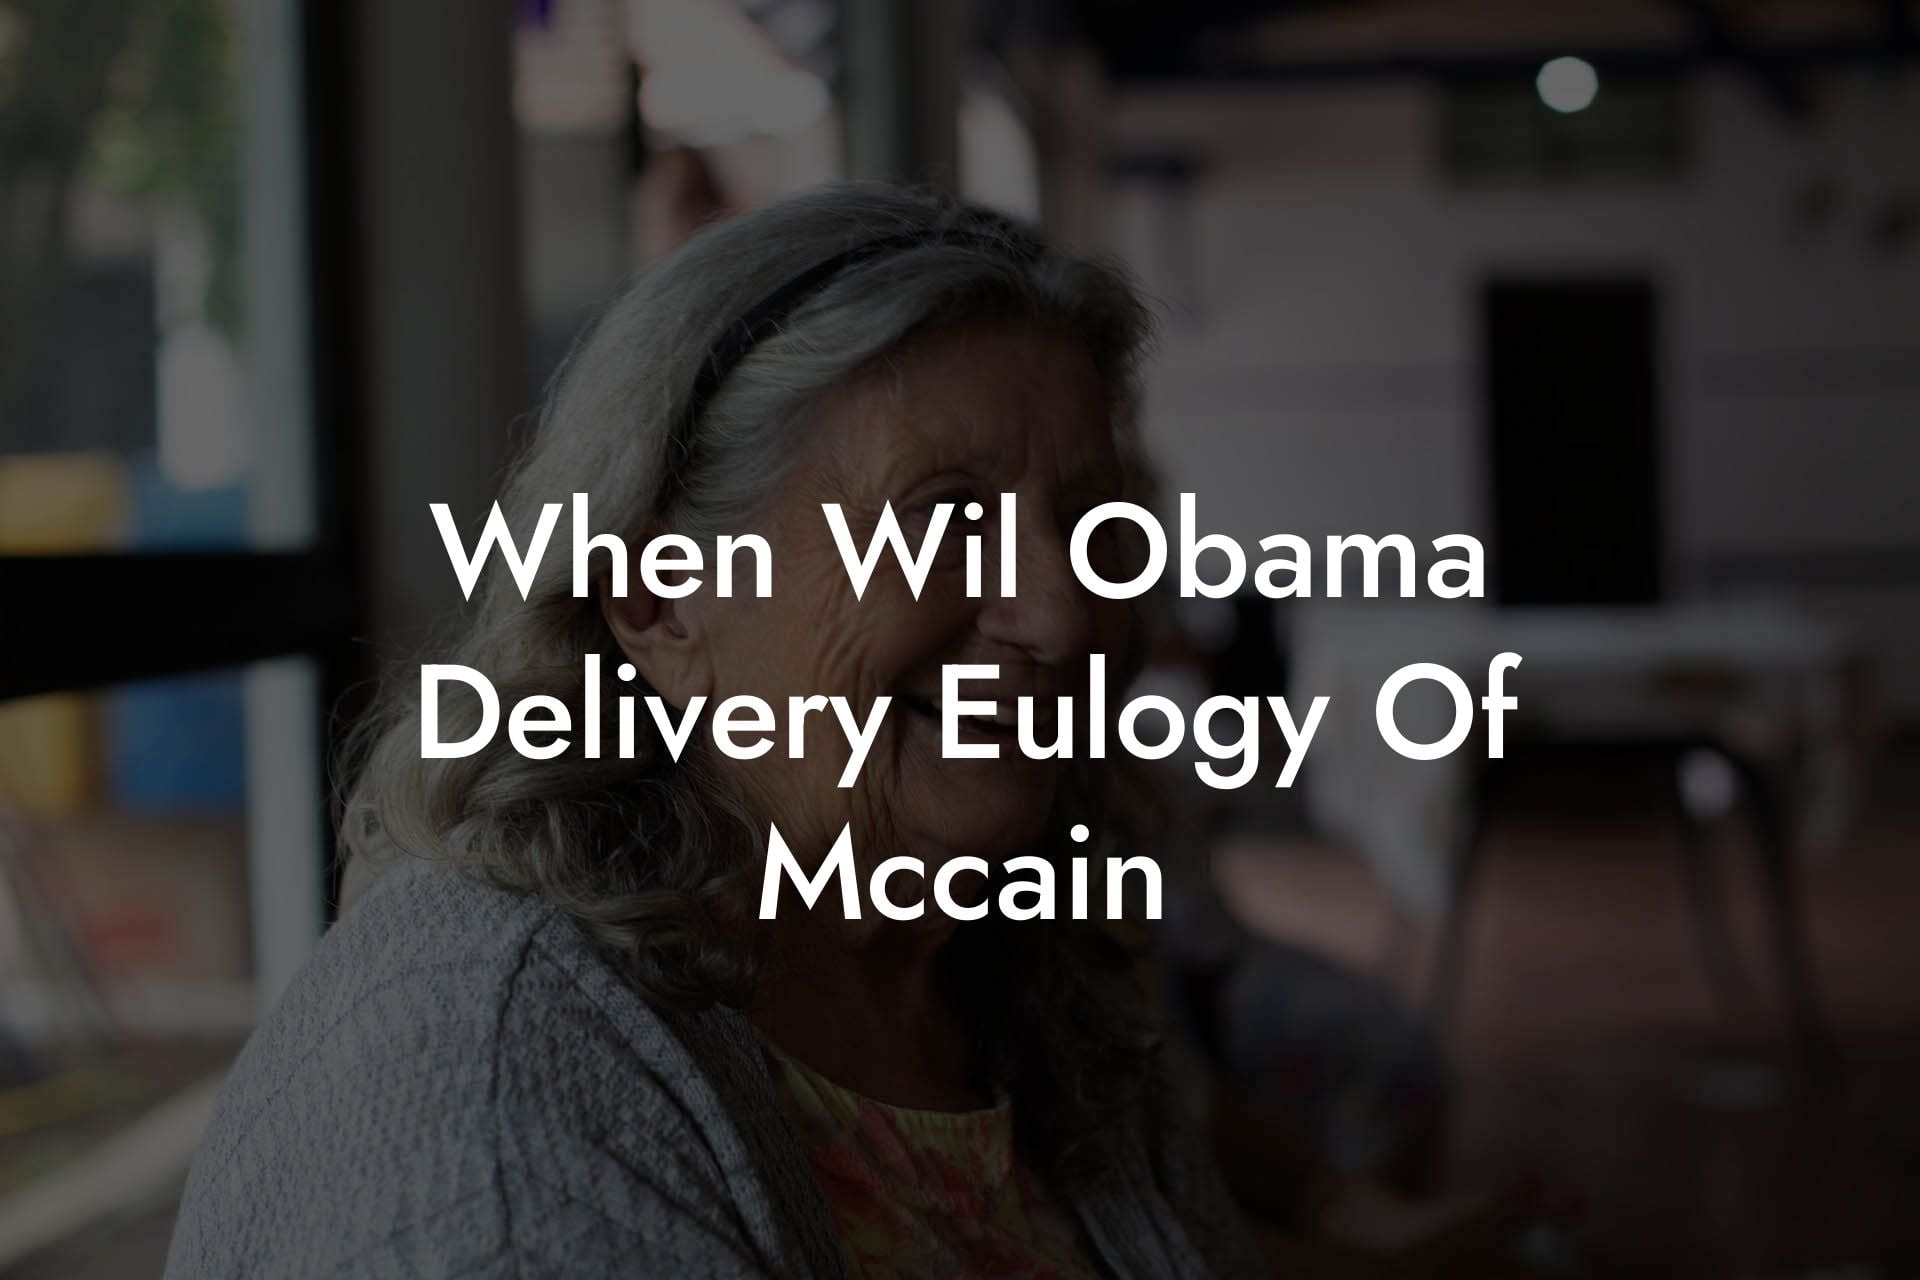 When Wil Obama Delivery Eulogy Of Mccain